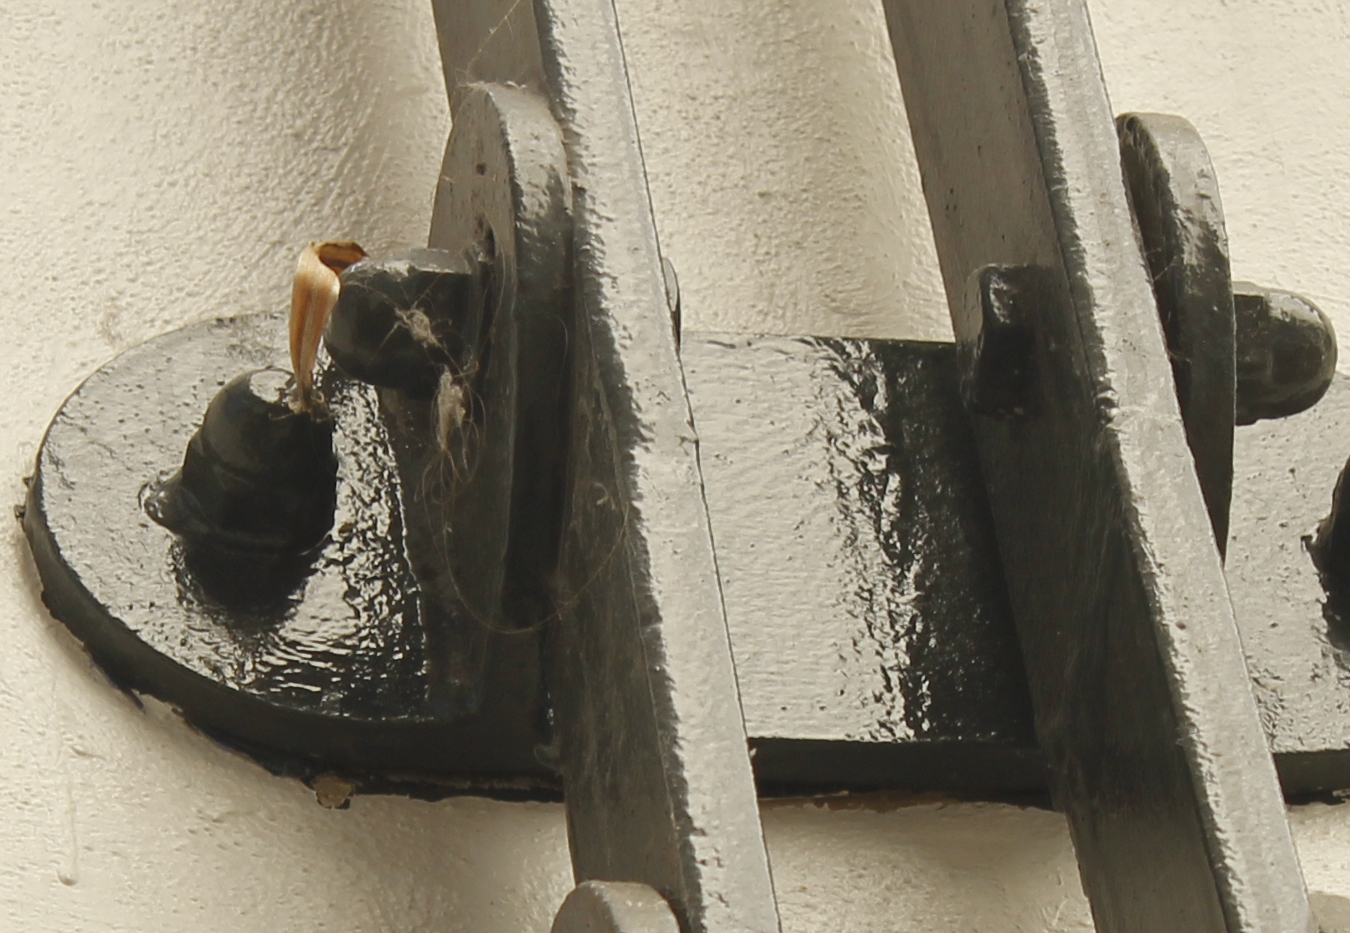 Close-up of a very strong steel bracket bolted to a wall, with a small dead leaf caught in a spider's web on one side.